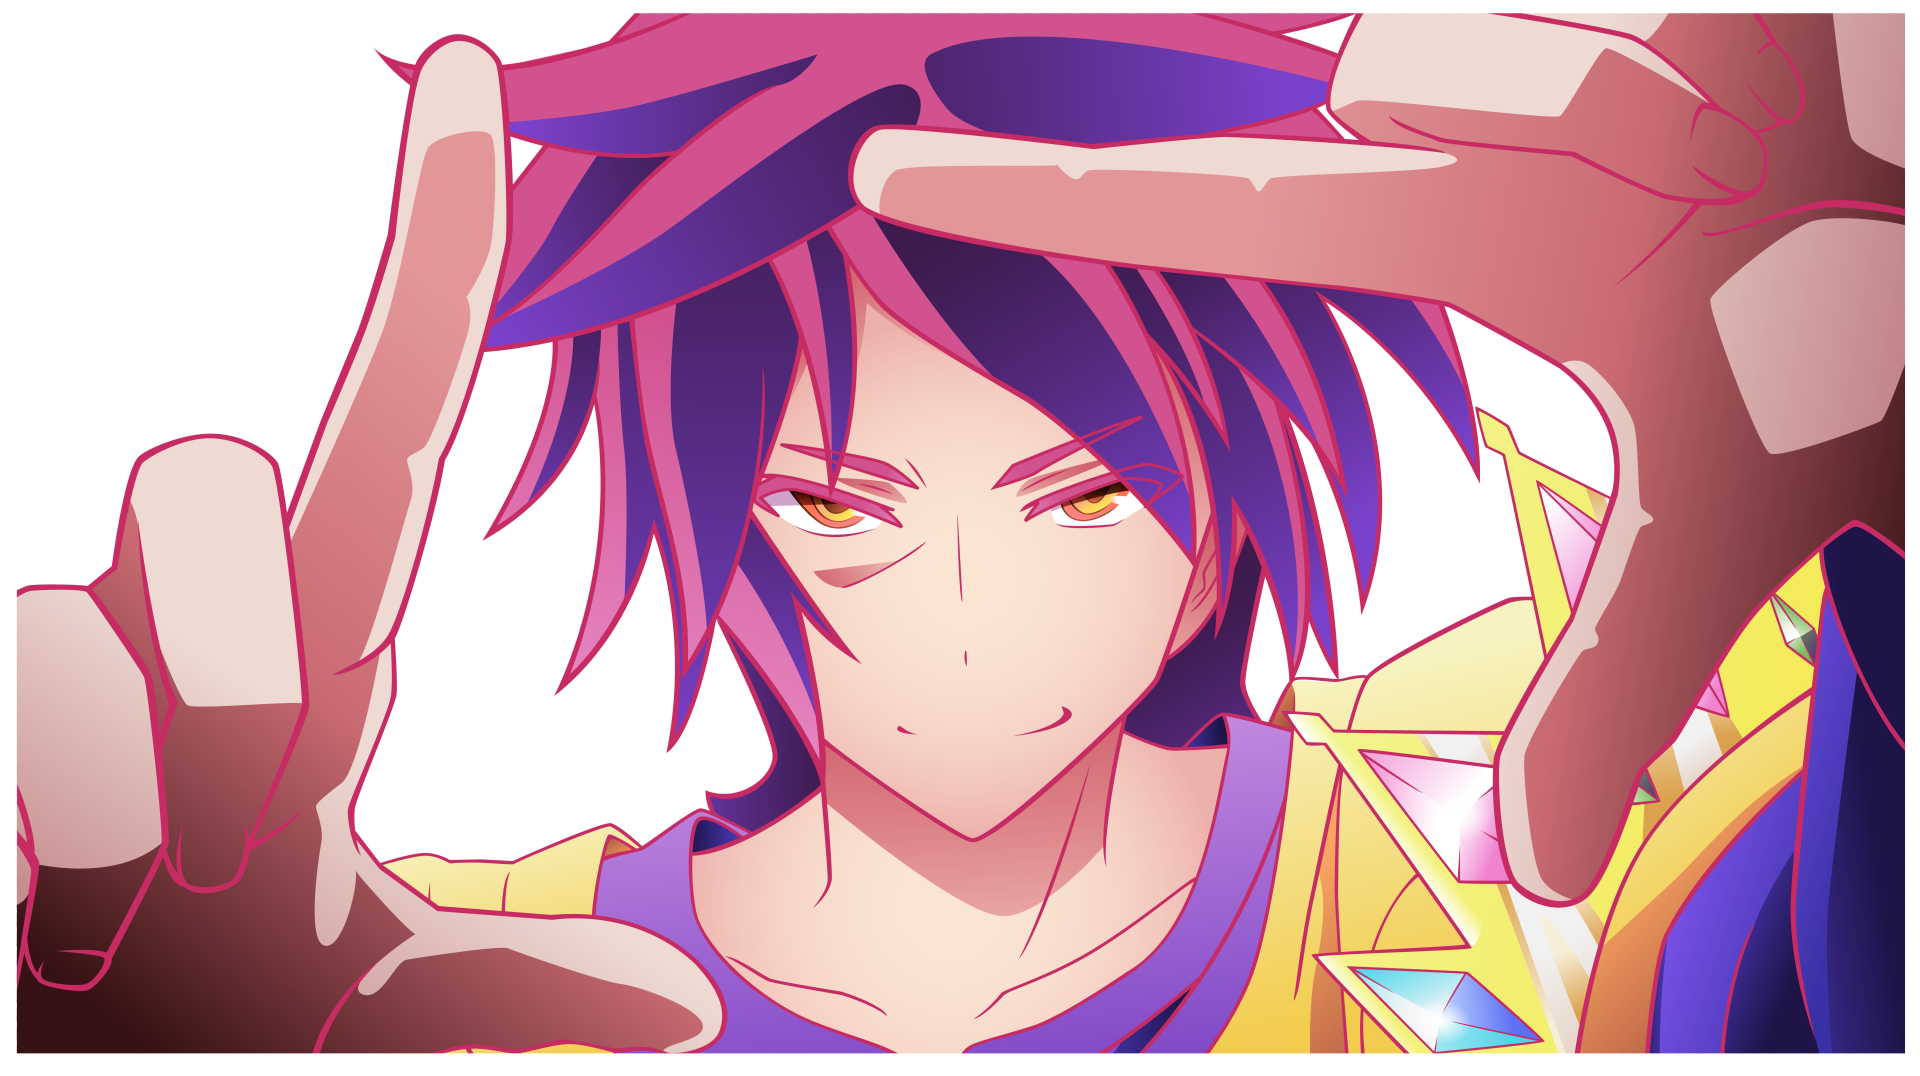 5. "Sora" from No Game No Life - wide 3